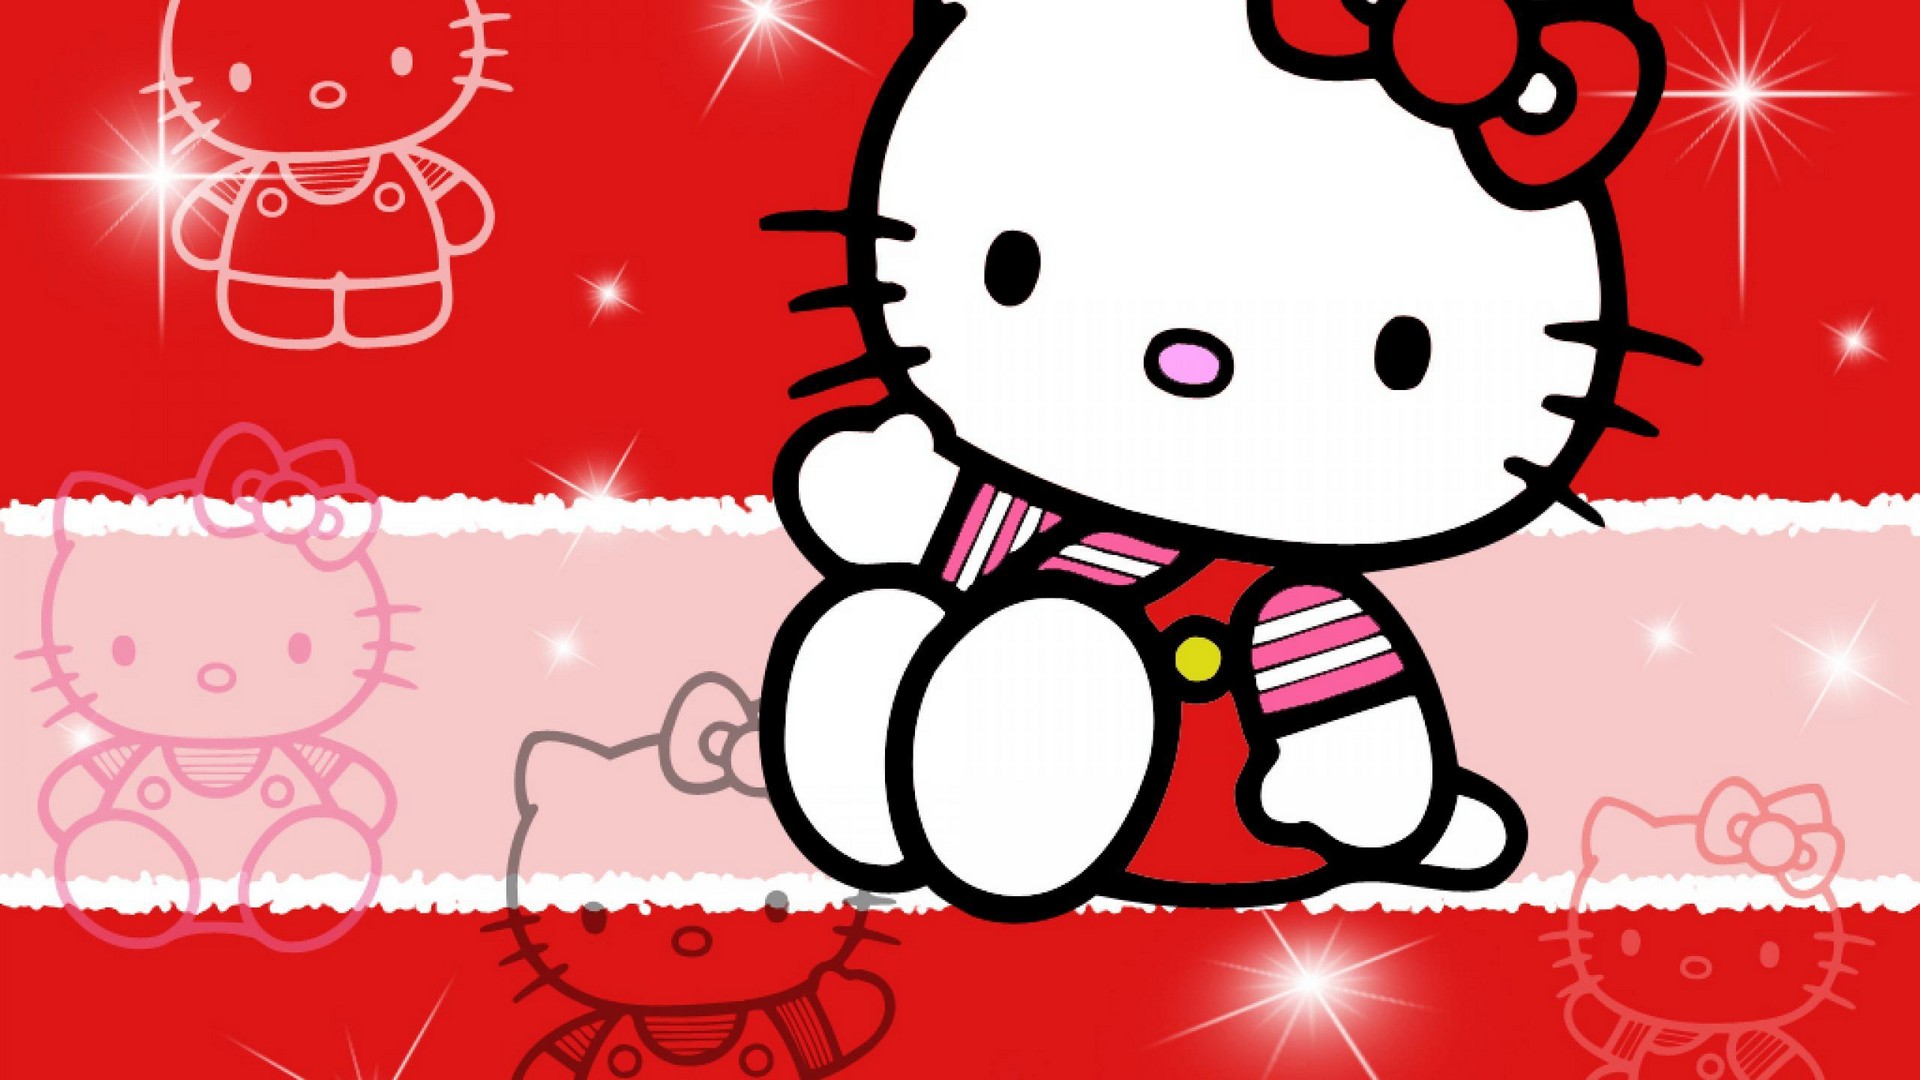 Wallpaper Hello Kitty Characters HD with image resolution 1920x1080 pixel. You can make this wallpaper for your Desktop Computer Backgrounds, Mac Wallpapers, Android Lock screen or iPhone Screensavers